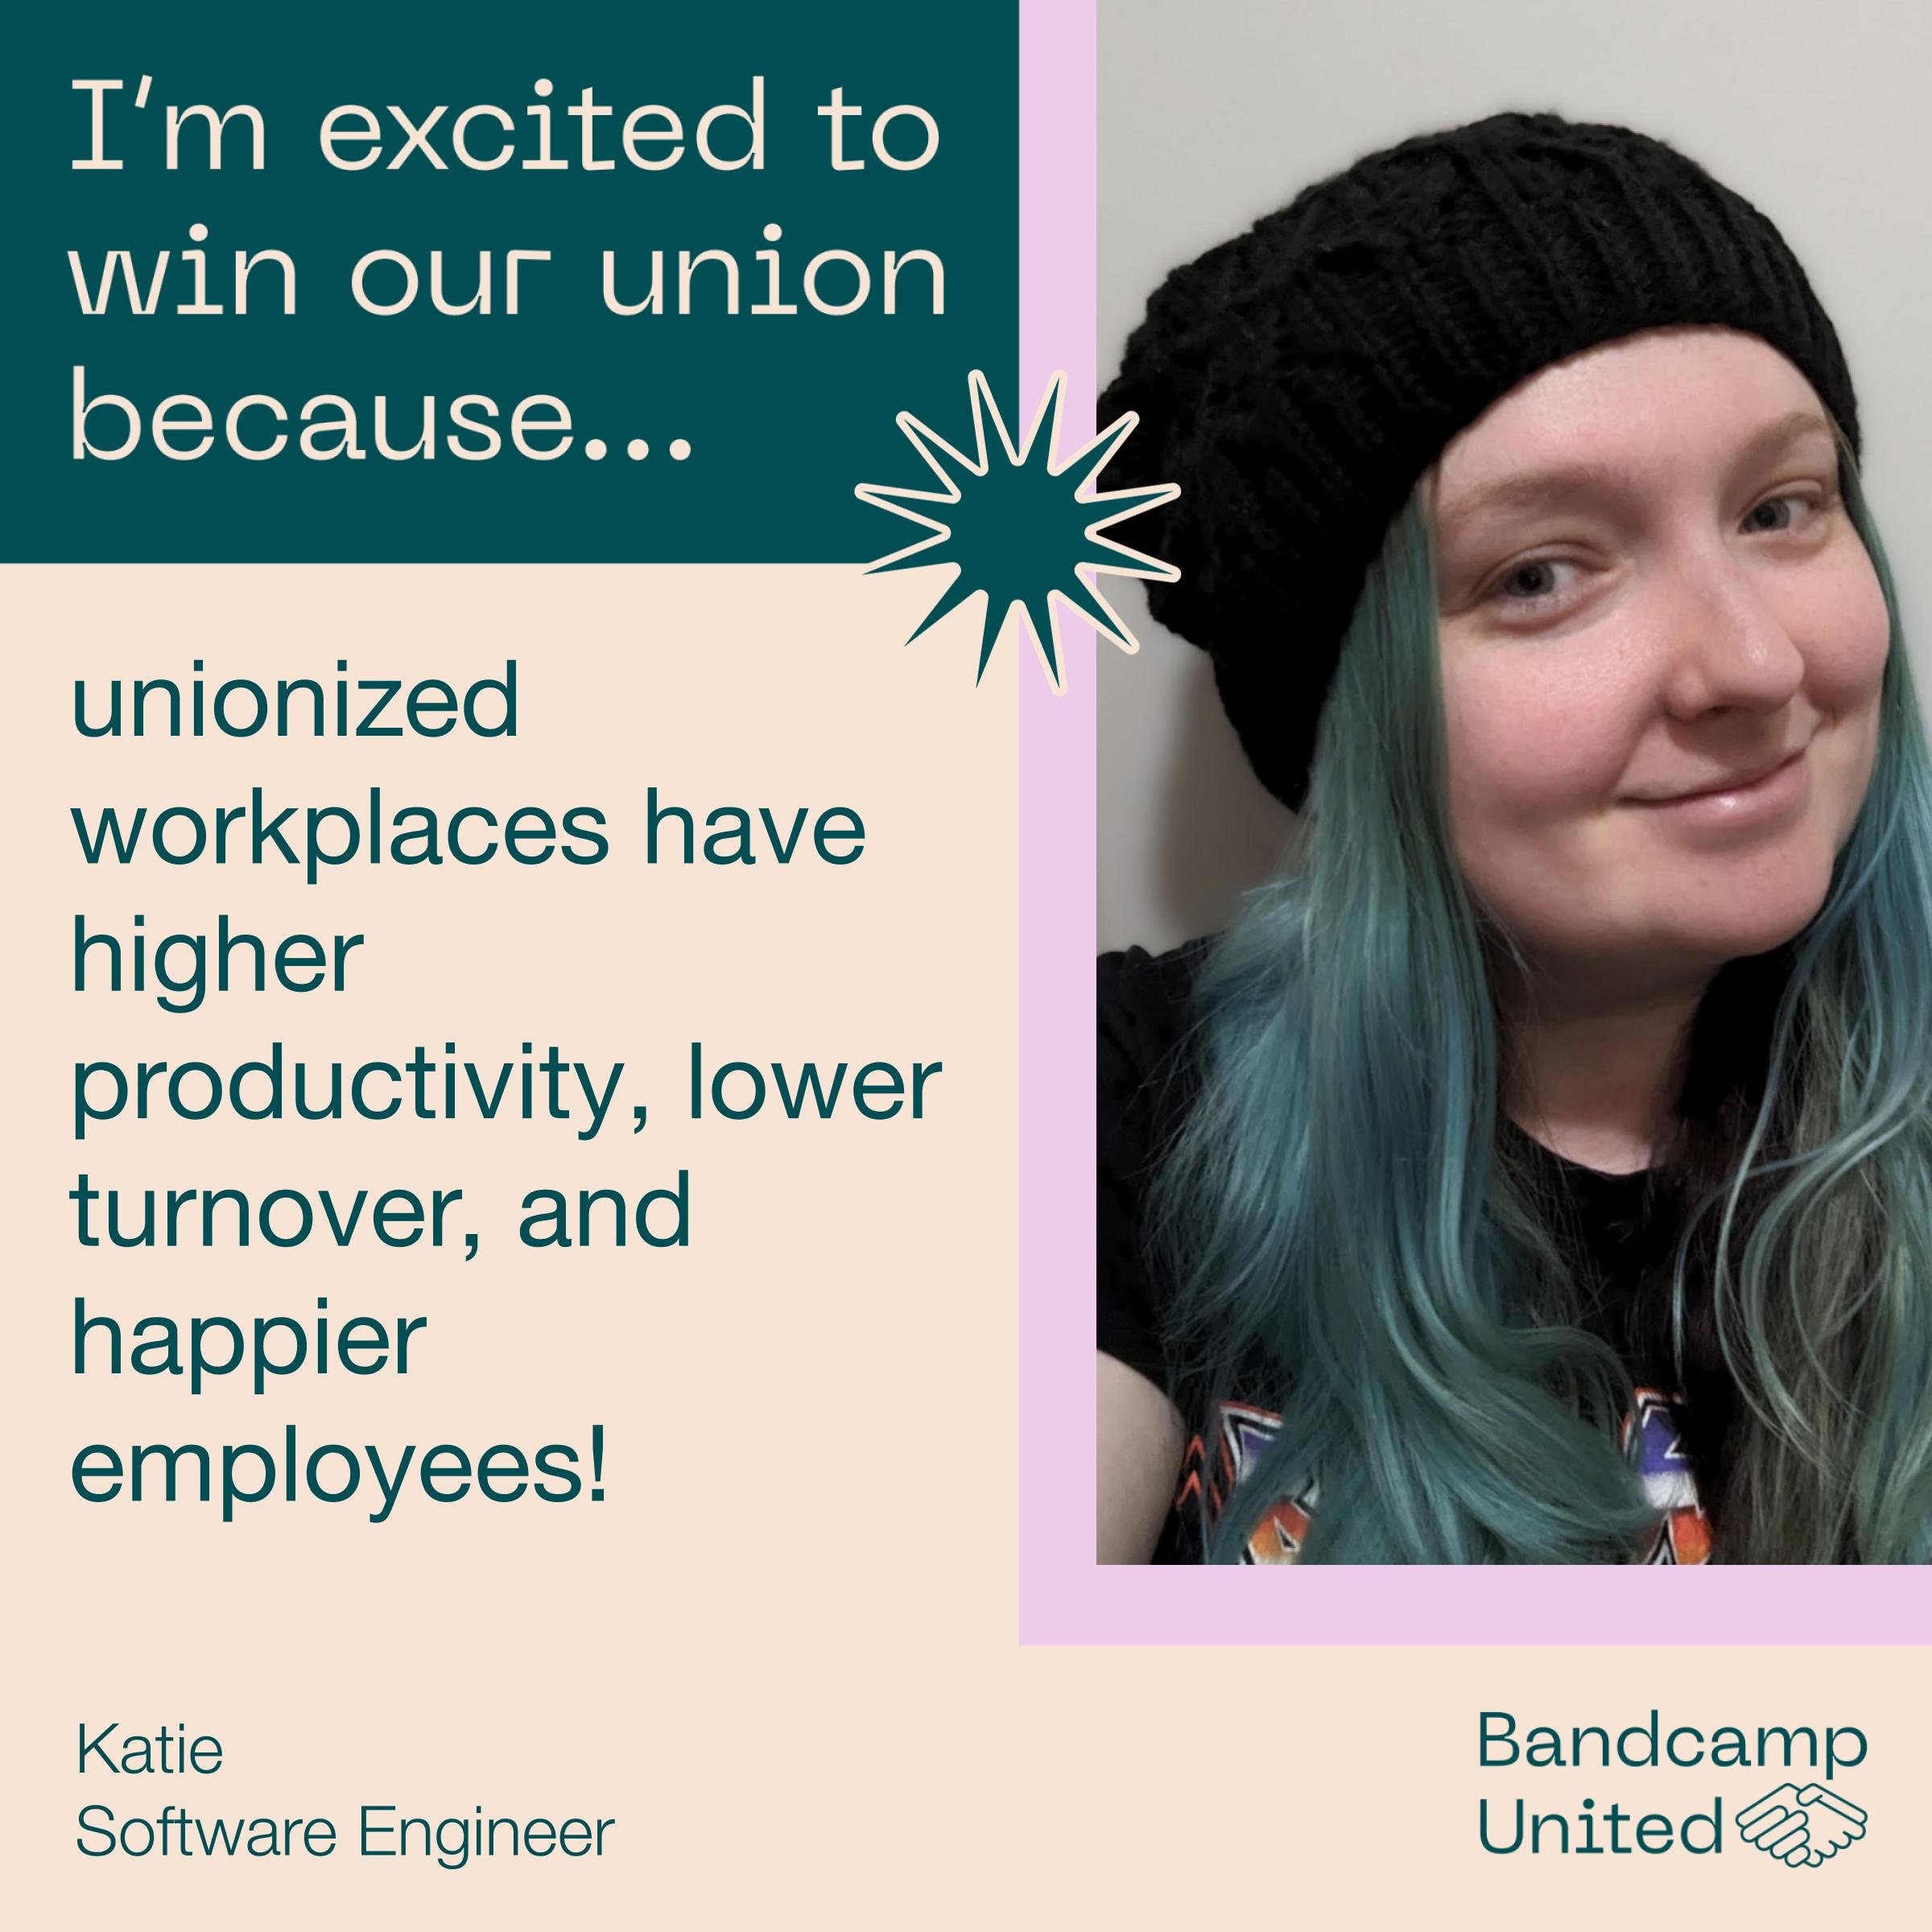 bandcamp united worker quotes 7.jpg